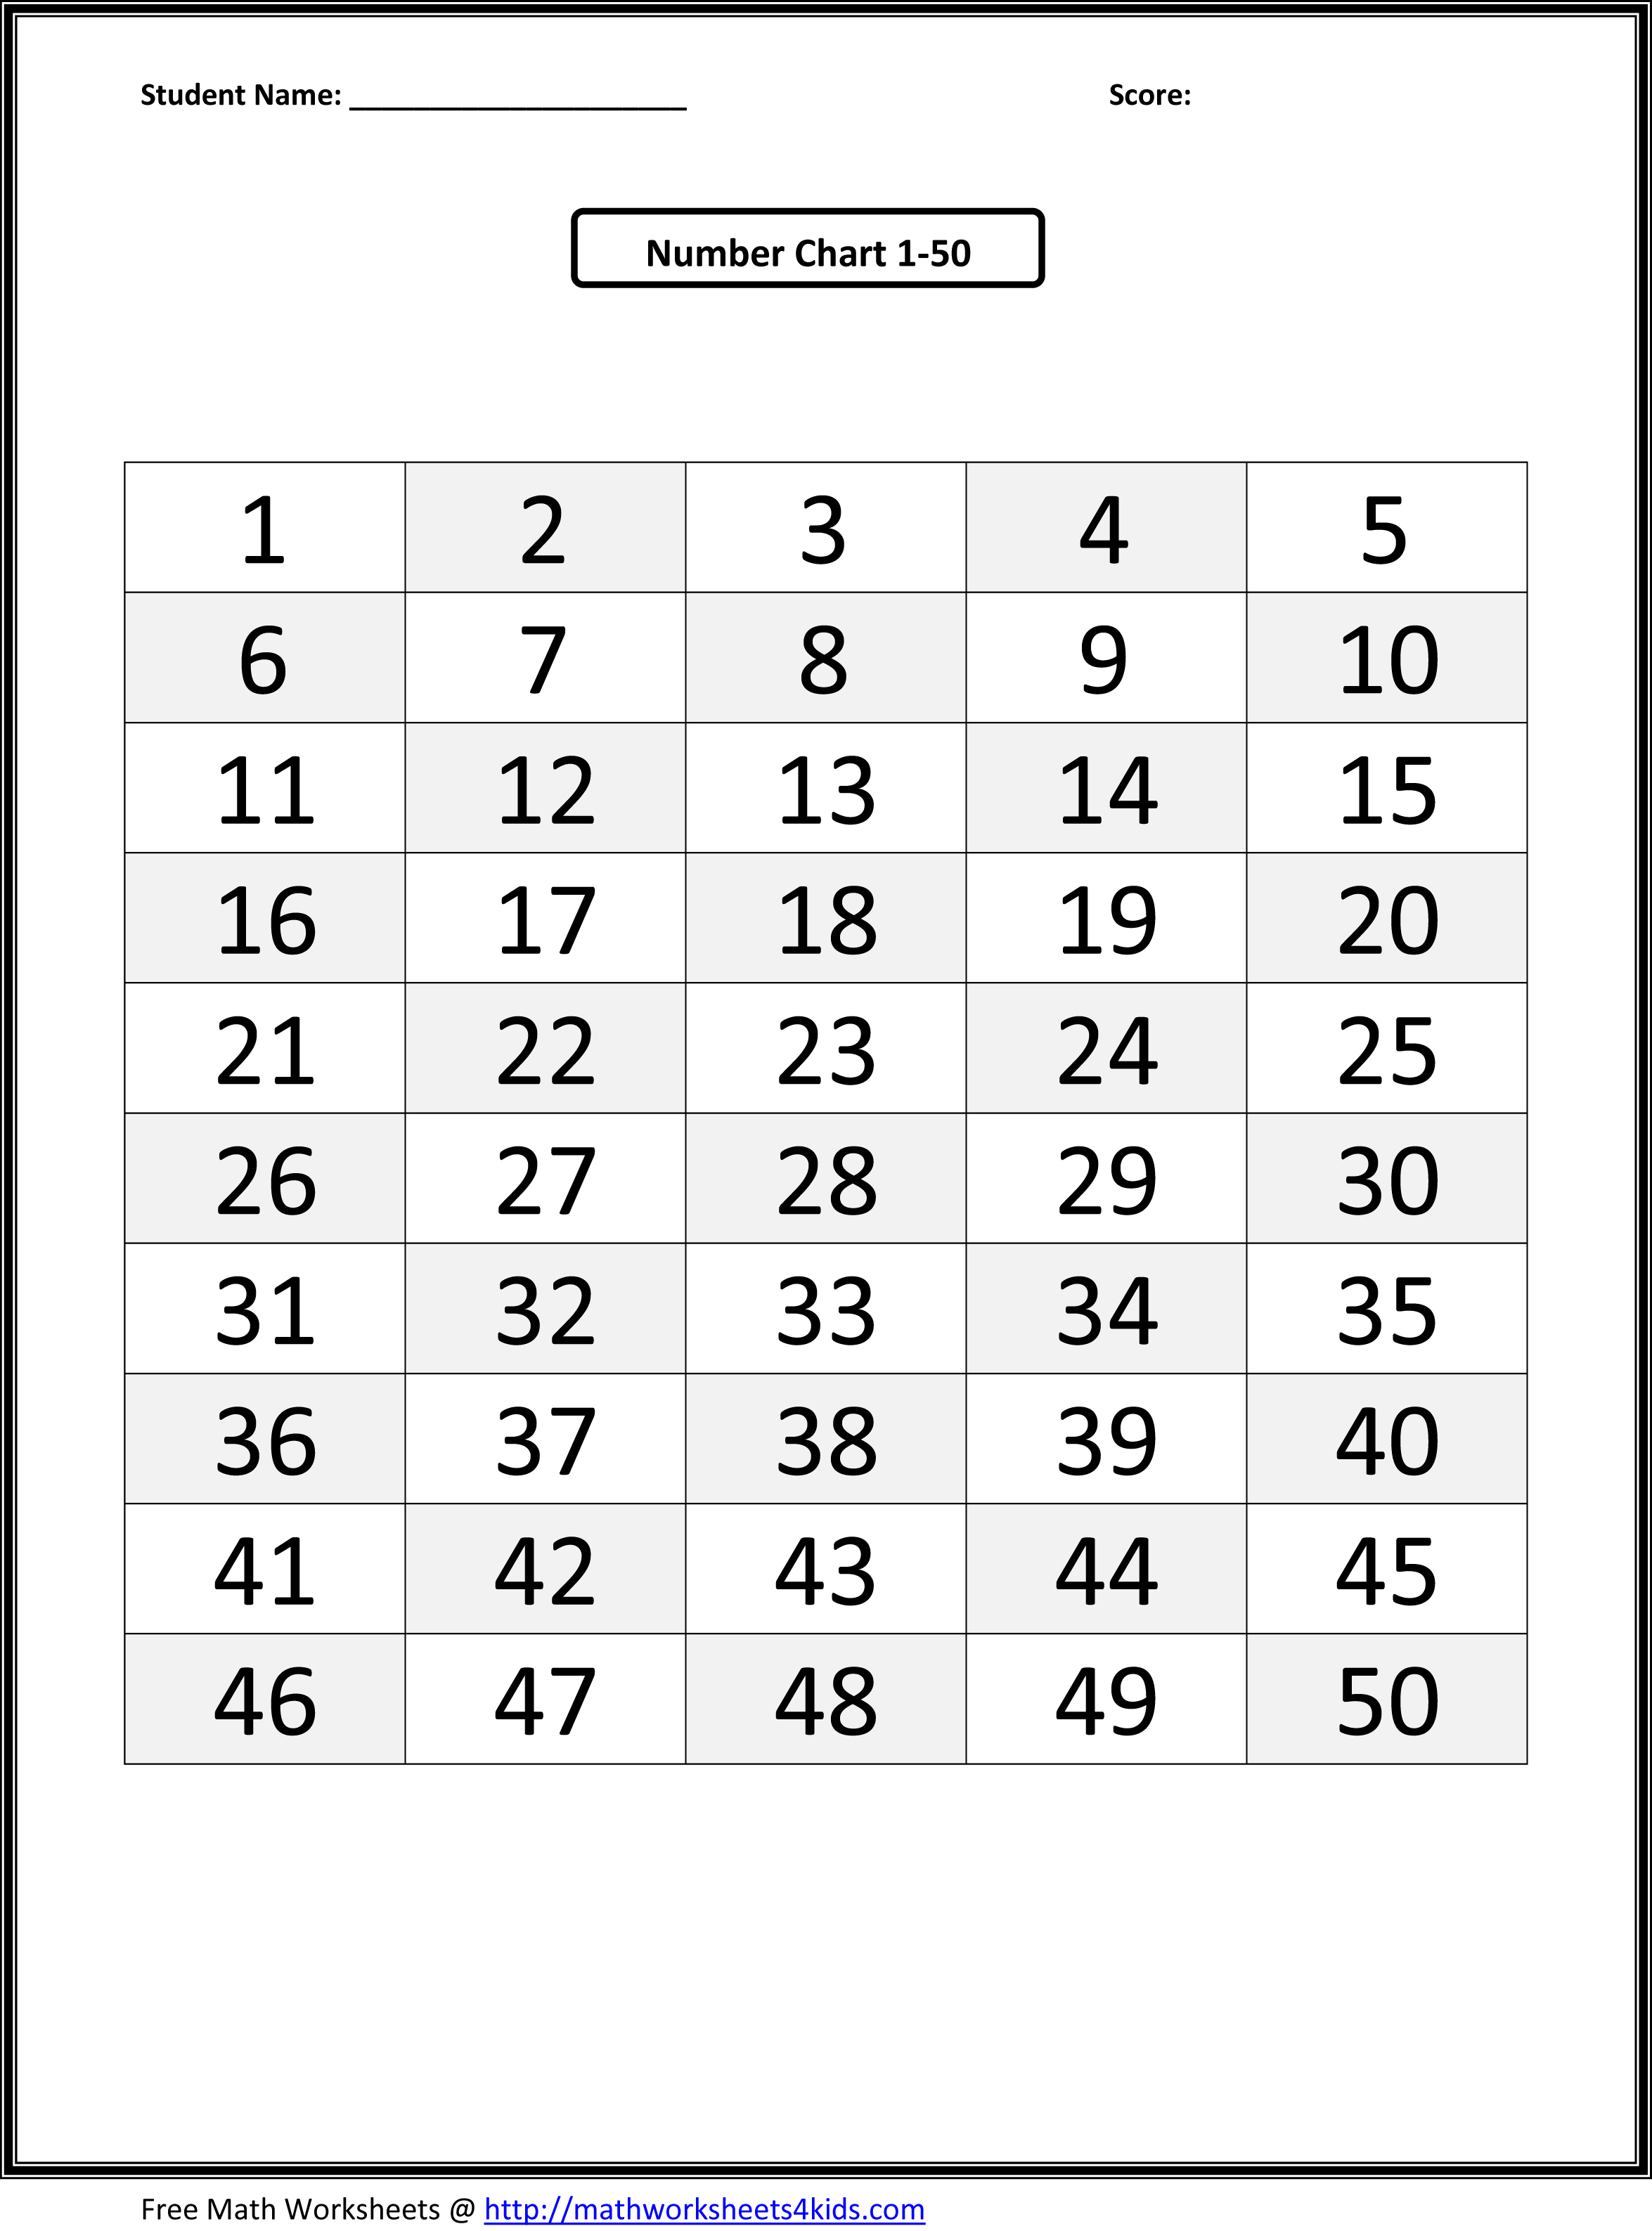 6 Best Images of Printable Number Chart  50 - Printable Number Chart  .